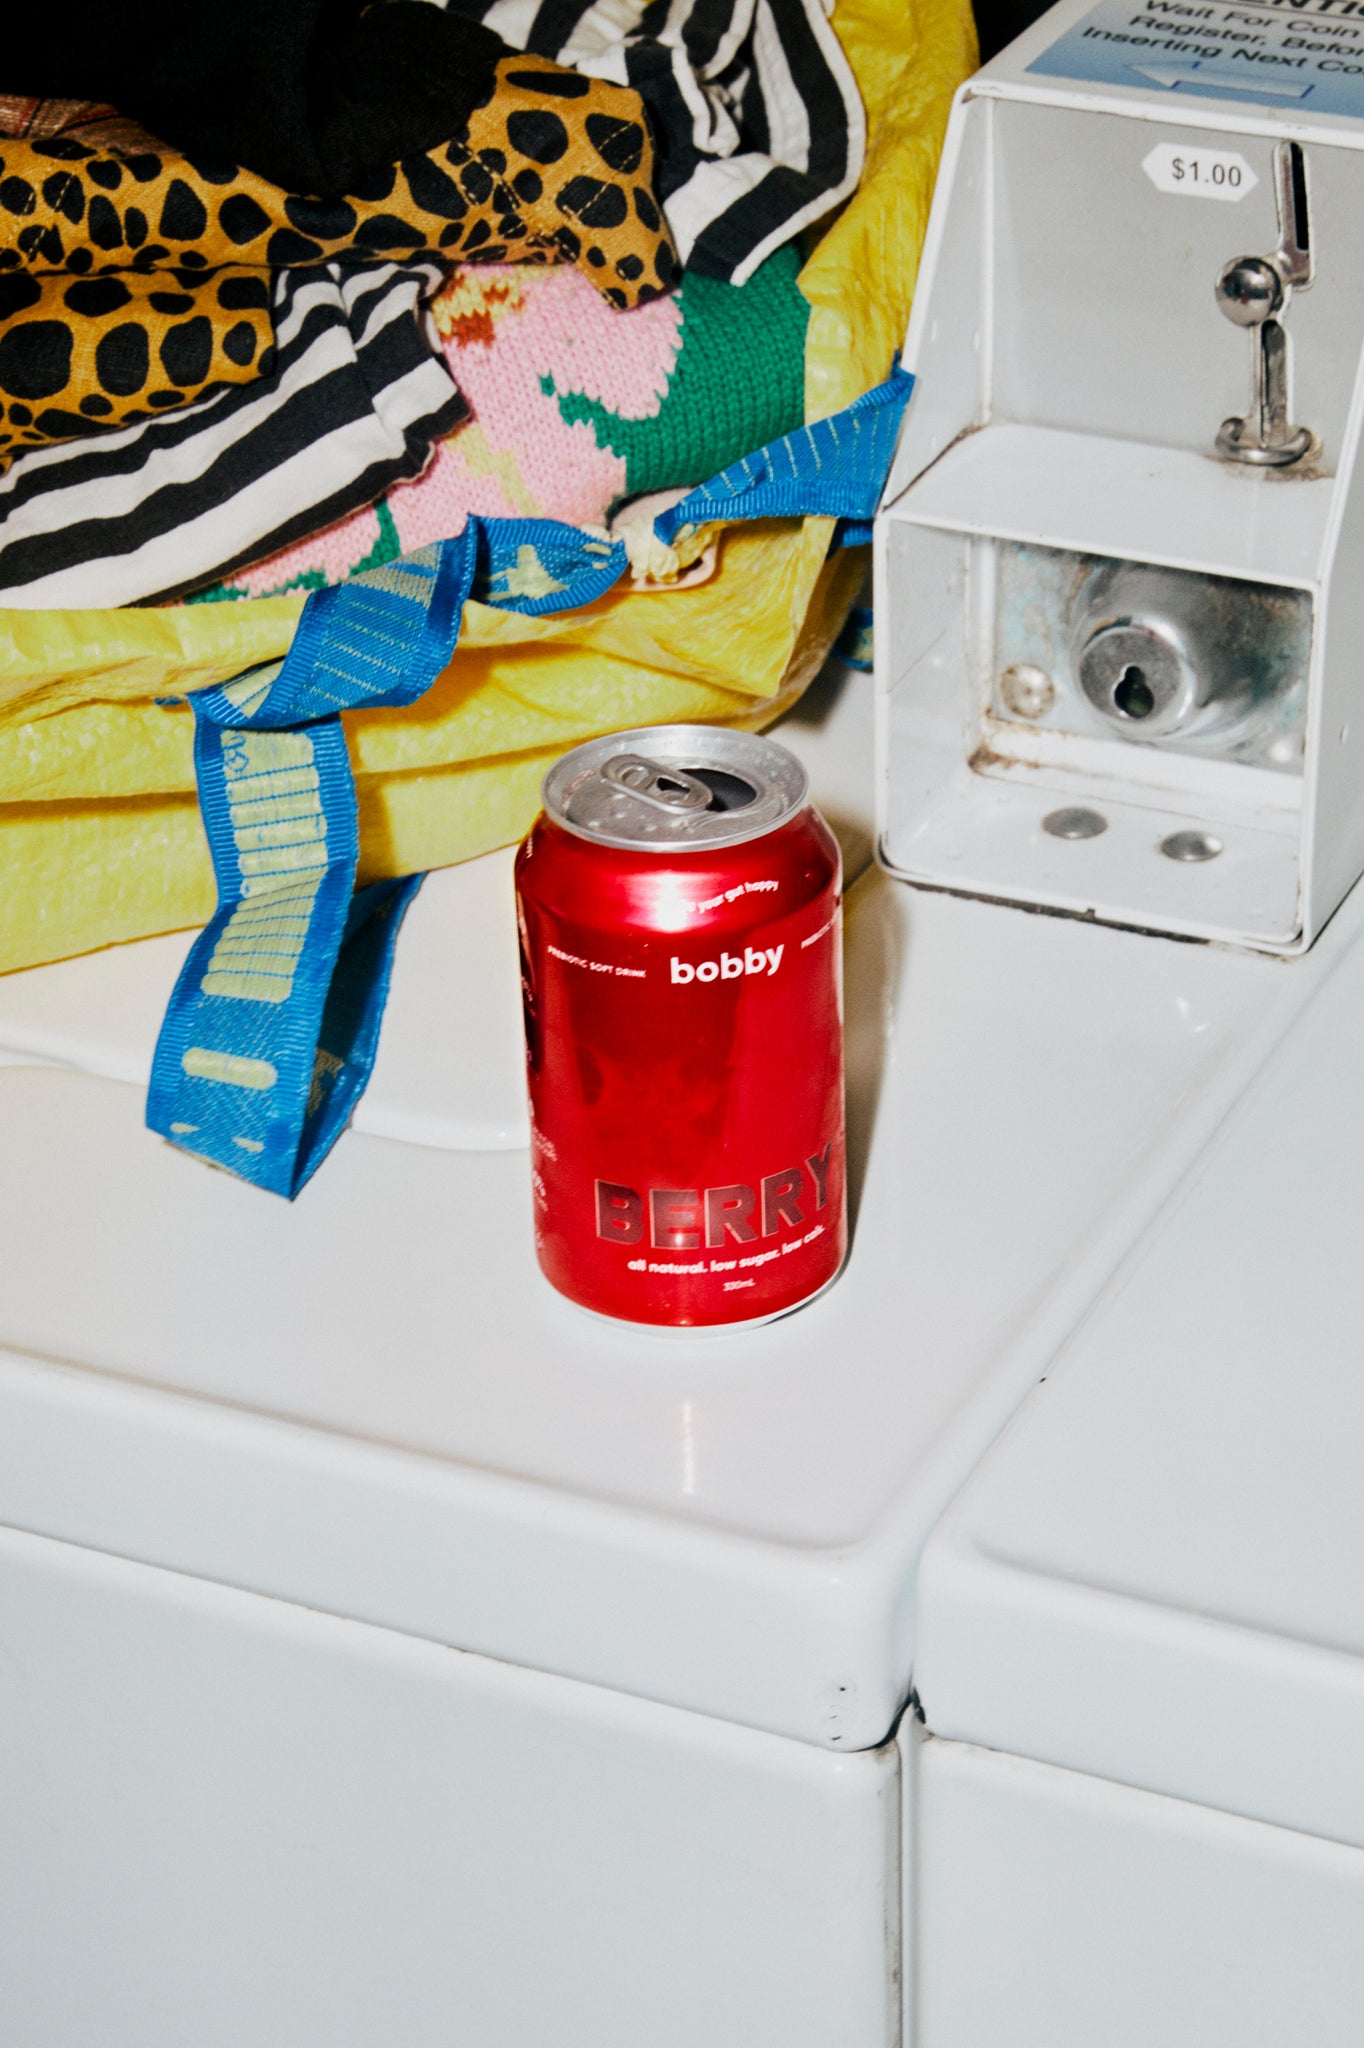  our radiant bobby berry soda photographed in an unconventional laundry mat